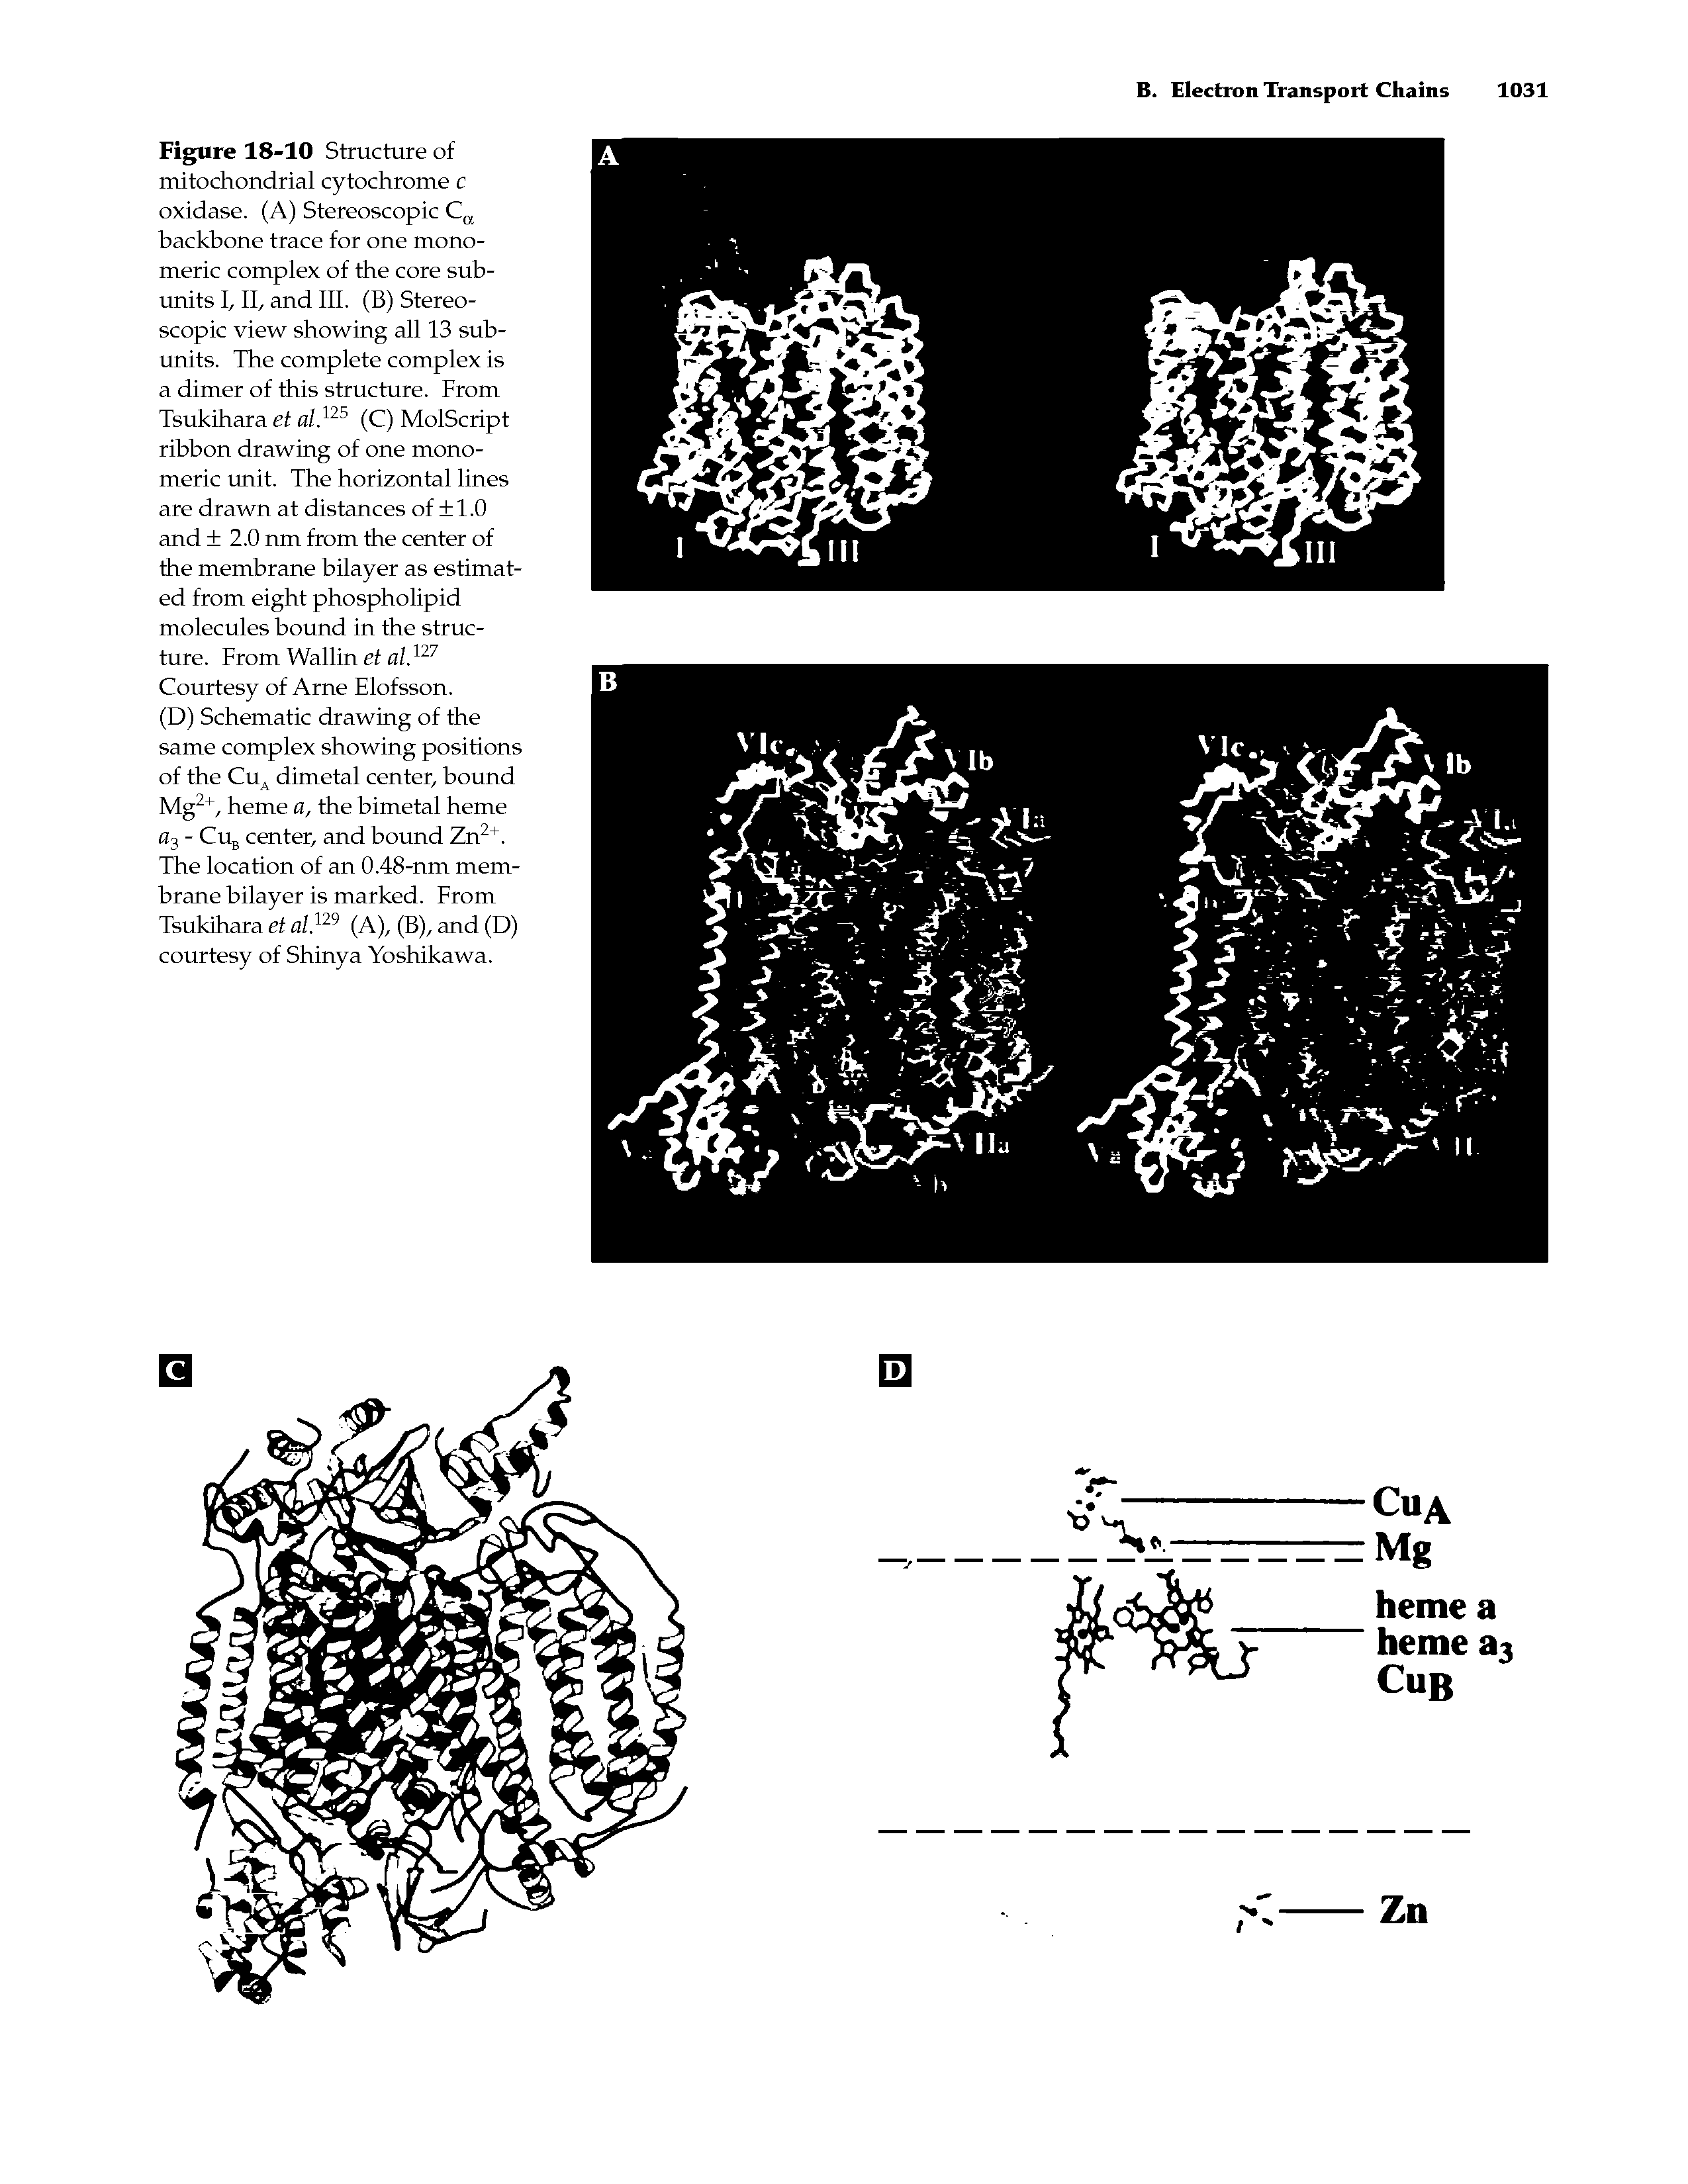 Figure 18-10 Structure of mitochondrial cytochrome c oxidase. (A) Stereoscopic Ca backbone trace for one monomeric complex of the core subunits I, II, and III. (B) Stereoscopic view showing all 13 subunits. The complete complex is a dimer of this structure. From Tsukihara et al.125 (C) MolScript ribbon drawing of one monomeric unit. The horizontal lines are drawn at distances of + 1.0 and +2.0 nm from the center of the membrane bilayer as estimated from eight phospholipid molecules bound in the structure. From Wallin et al.127 Courtesy of Arne Elofsson.